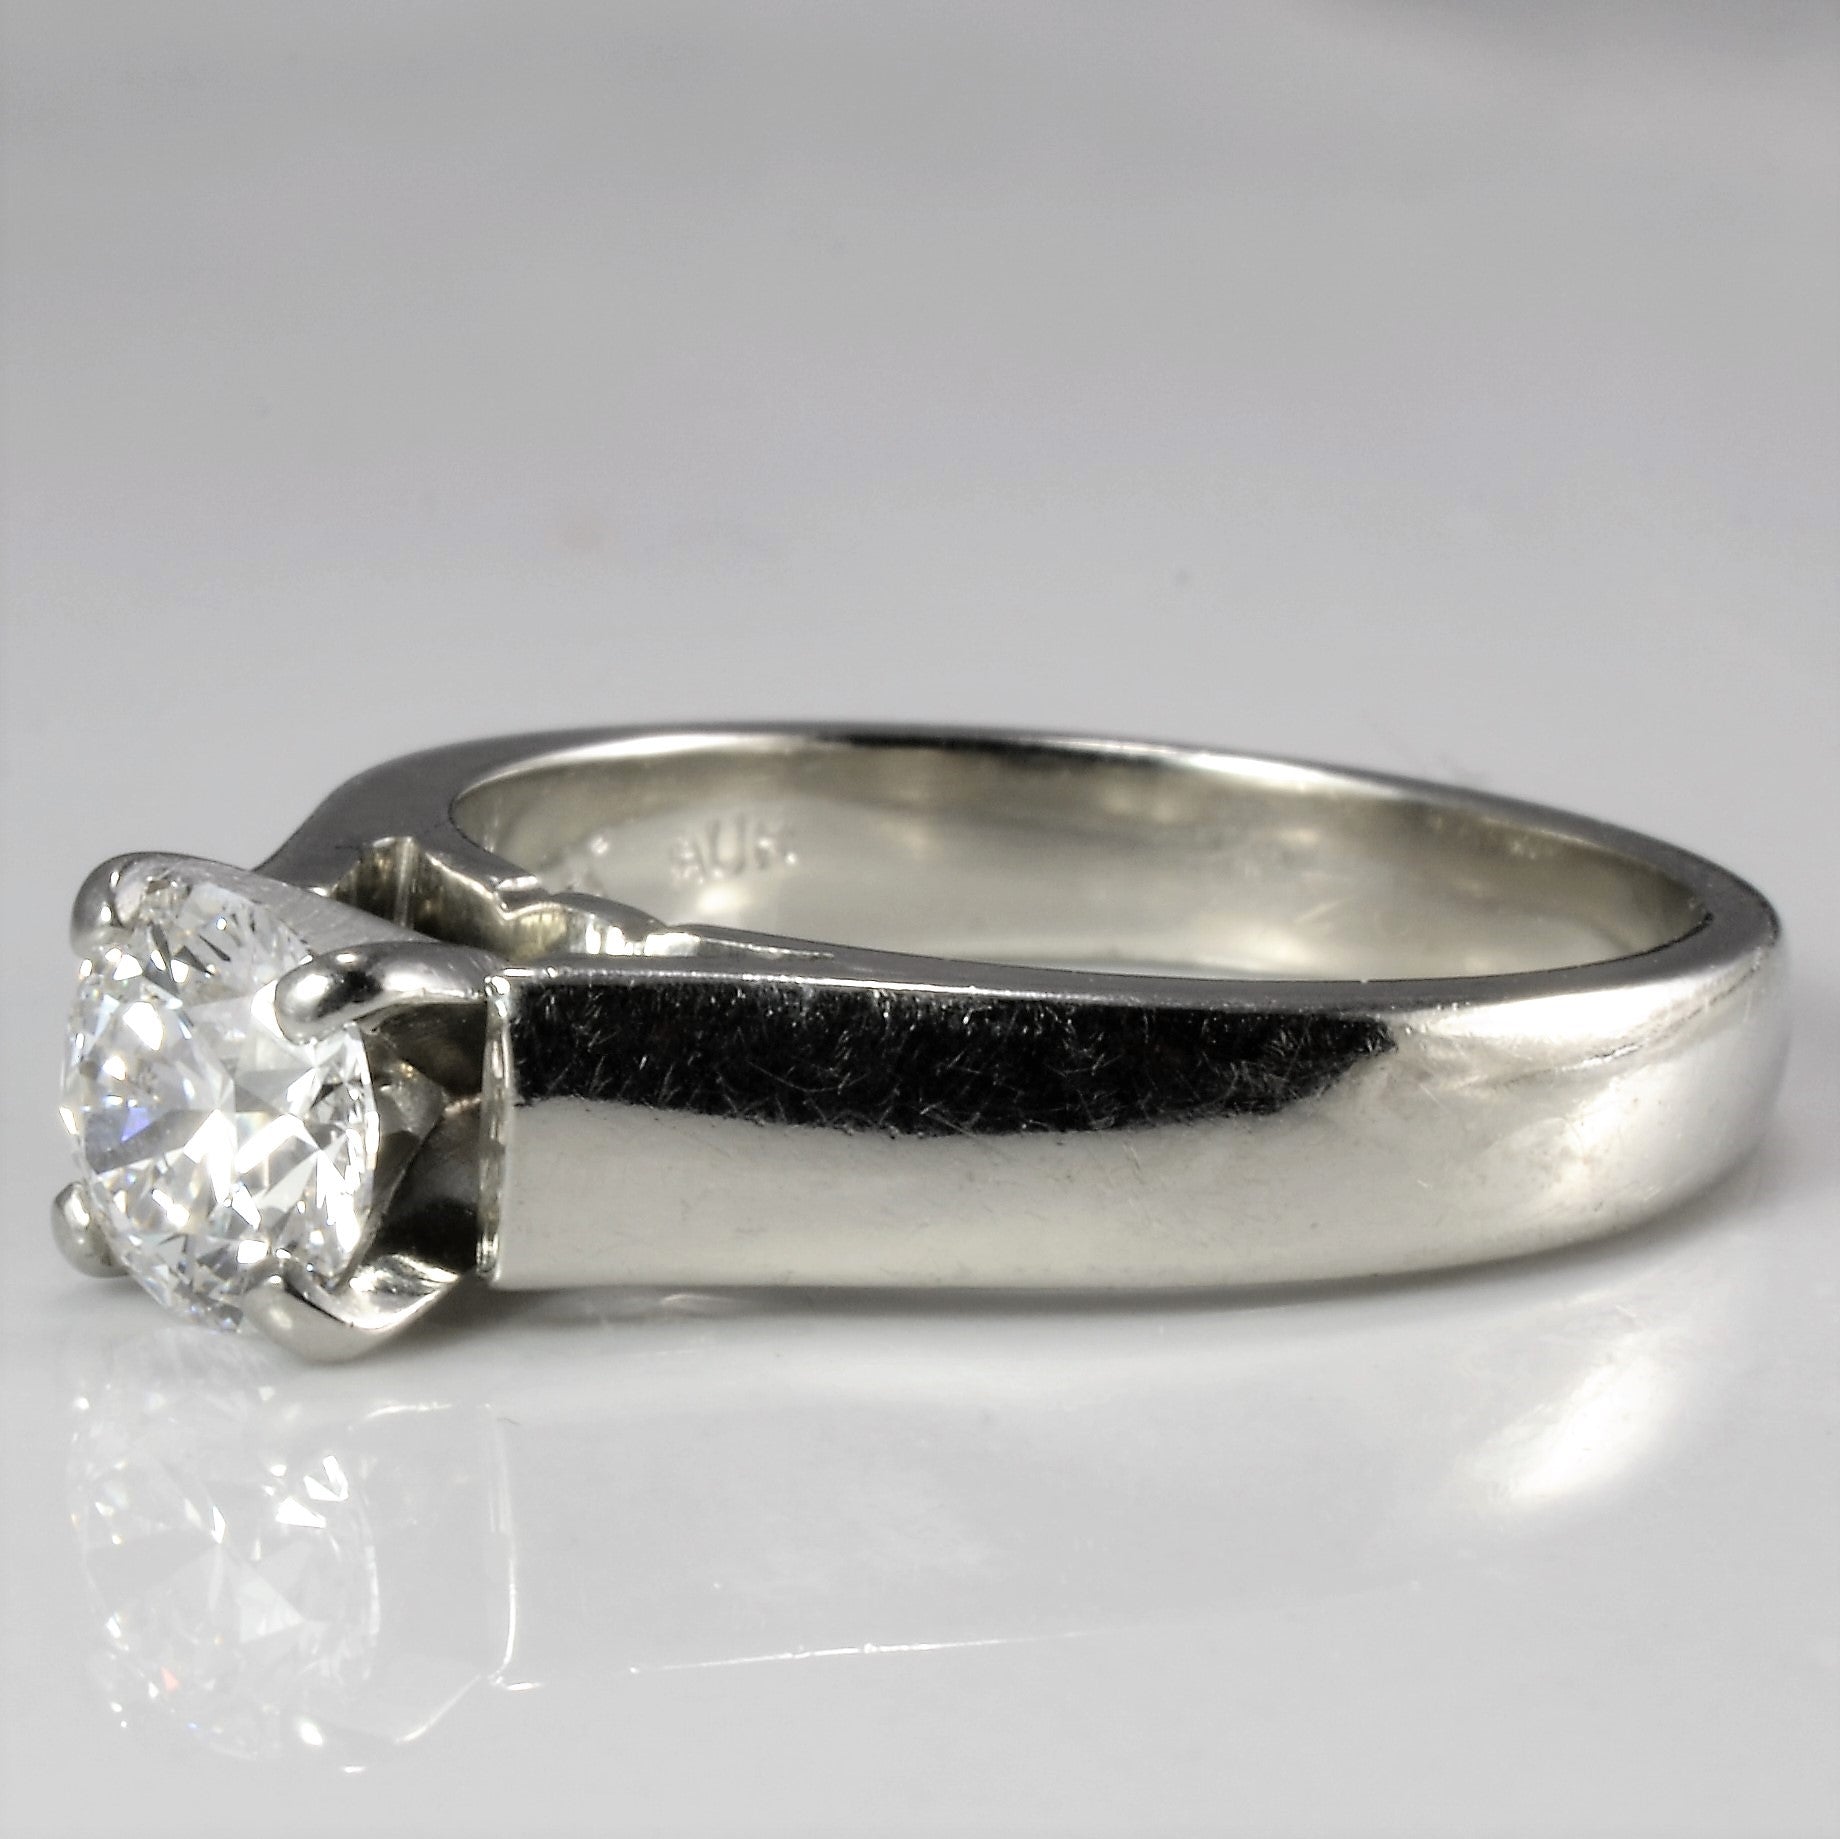 Tapered Solitaire GIA Diamond Engagement Ring | 0.73ct | SZ 6.5 |